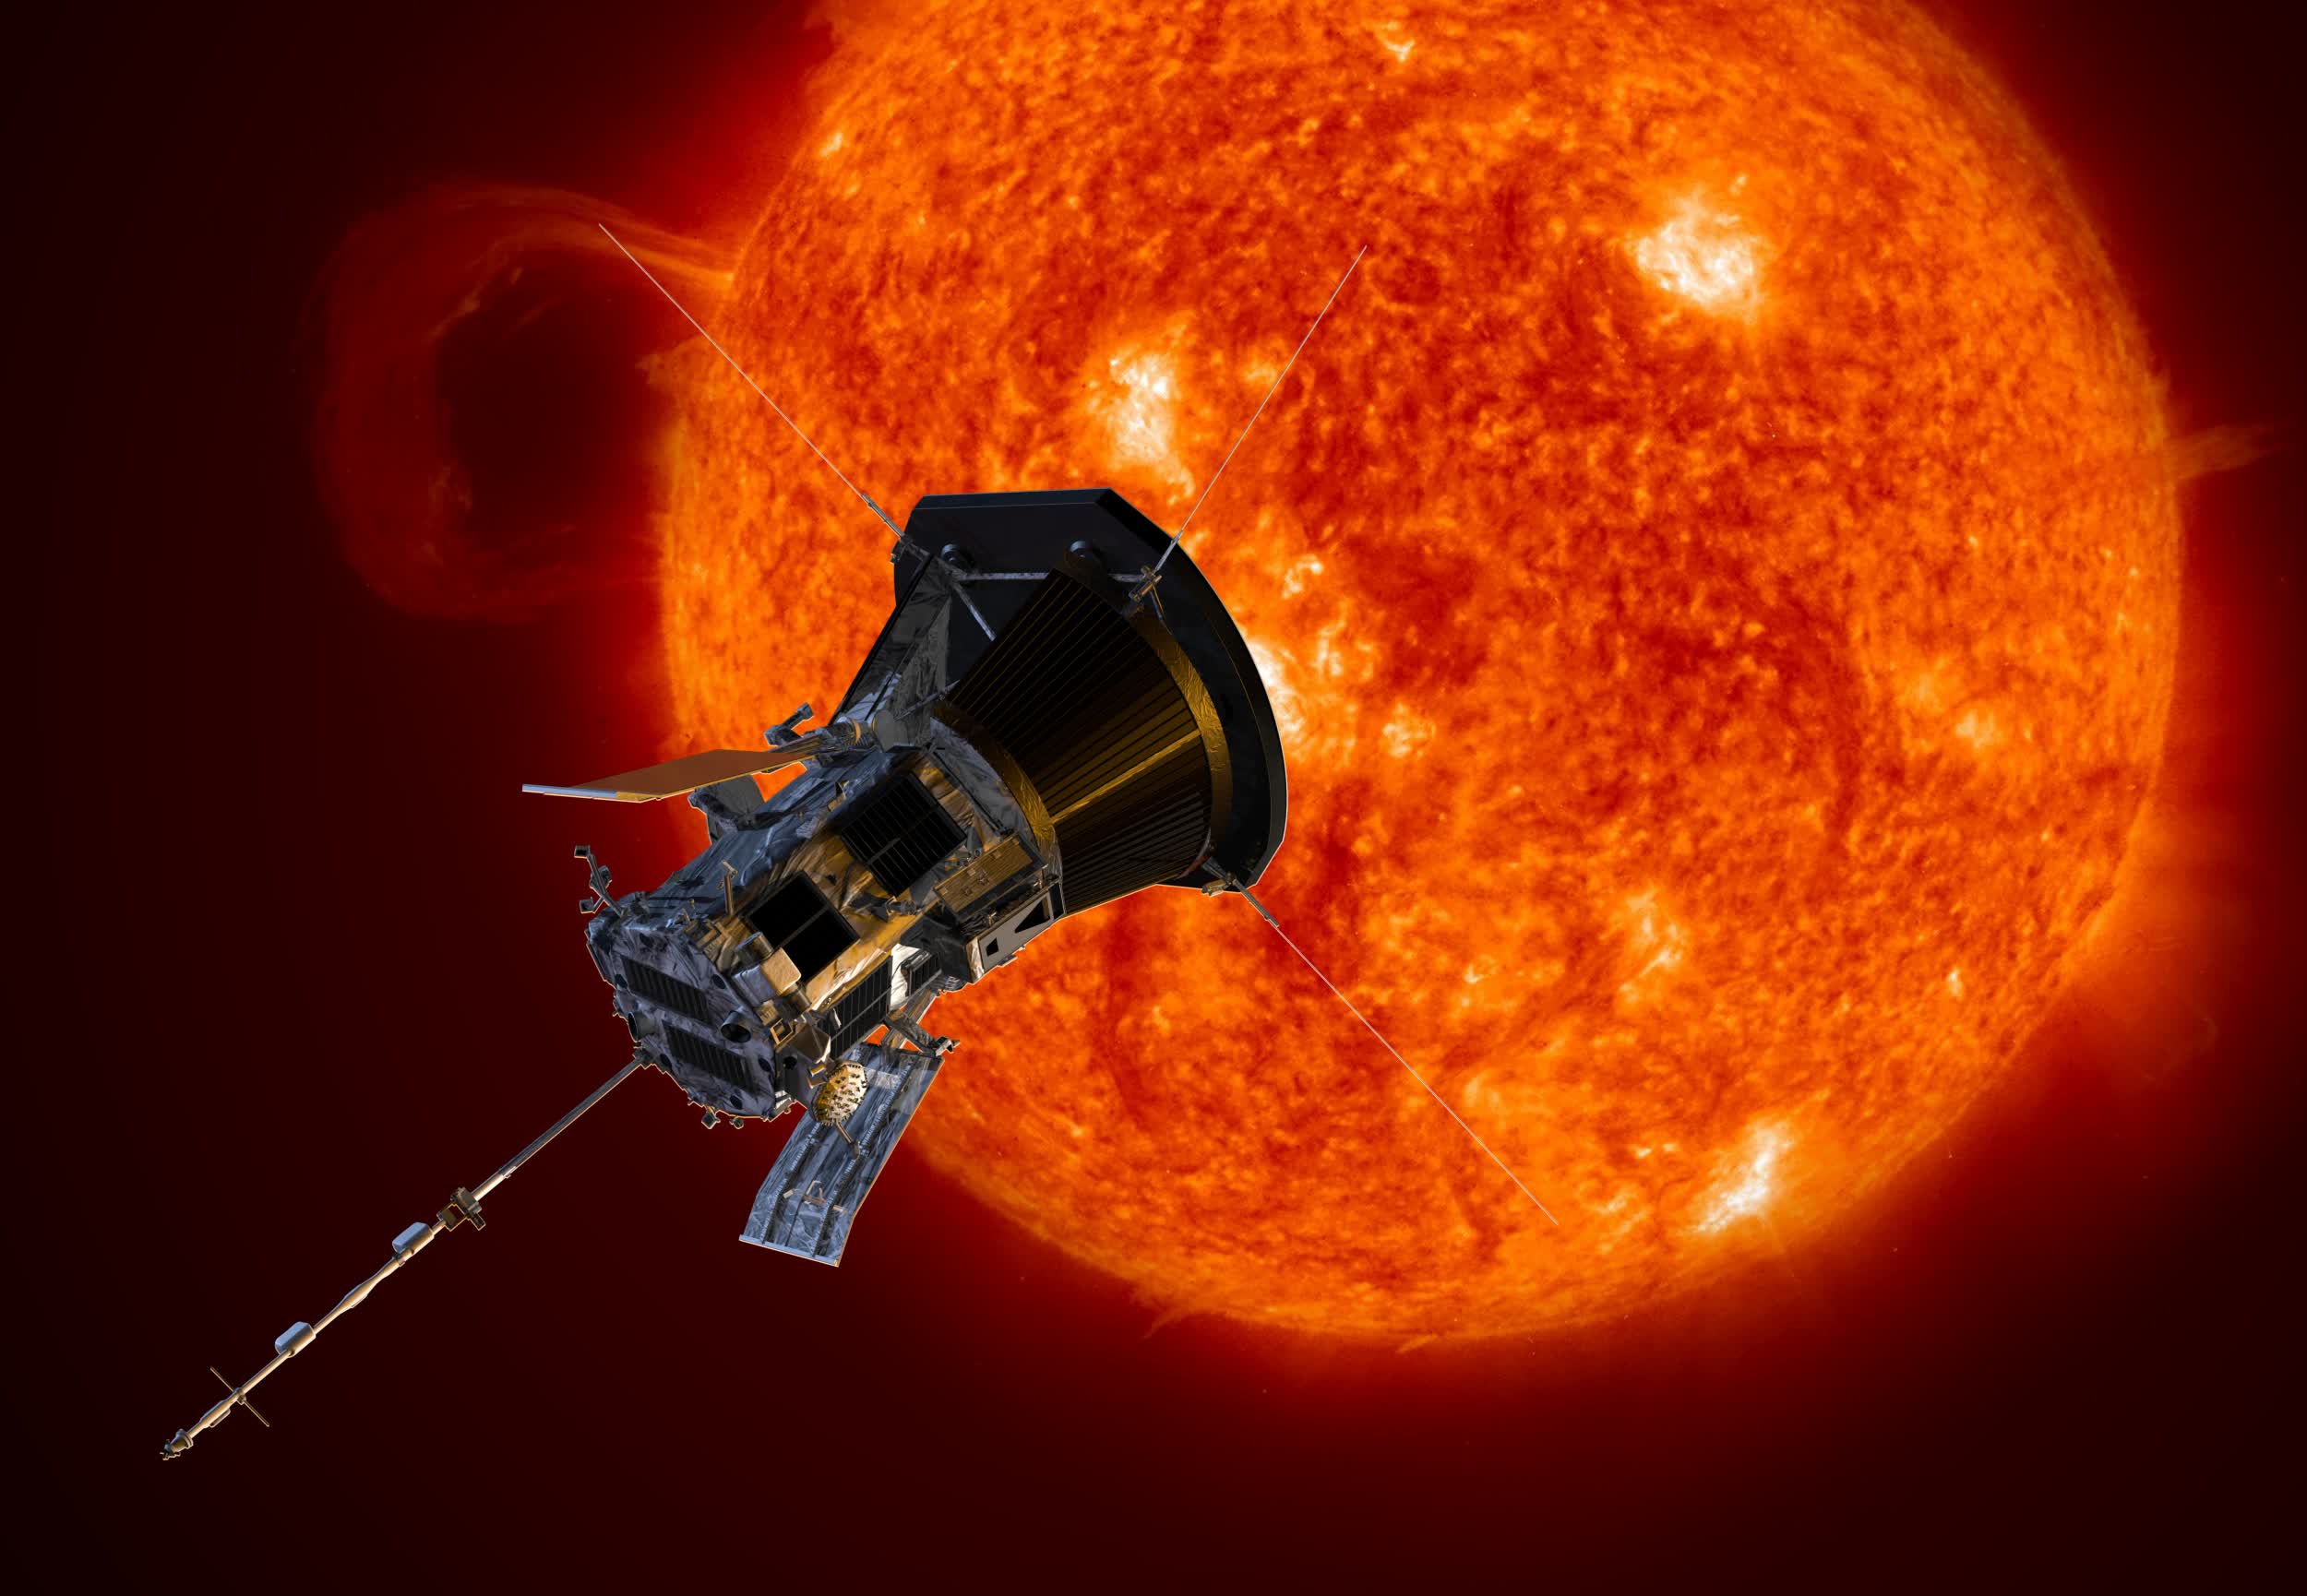 NASA's Parker Solar Probe becomes the first spacecraft to fly through the Sun's atmosphere